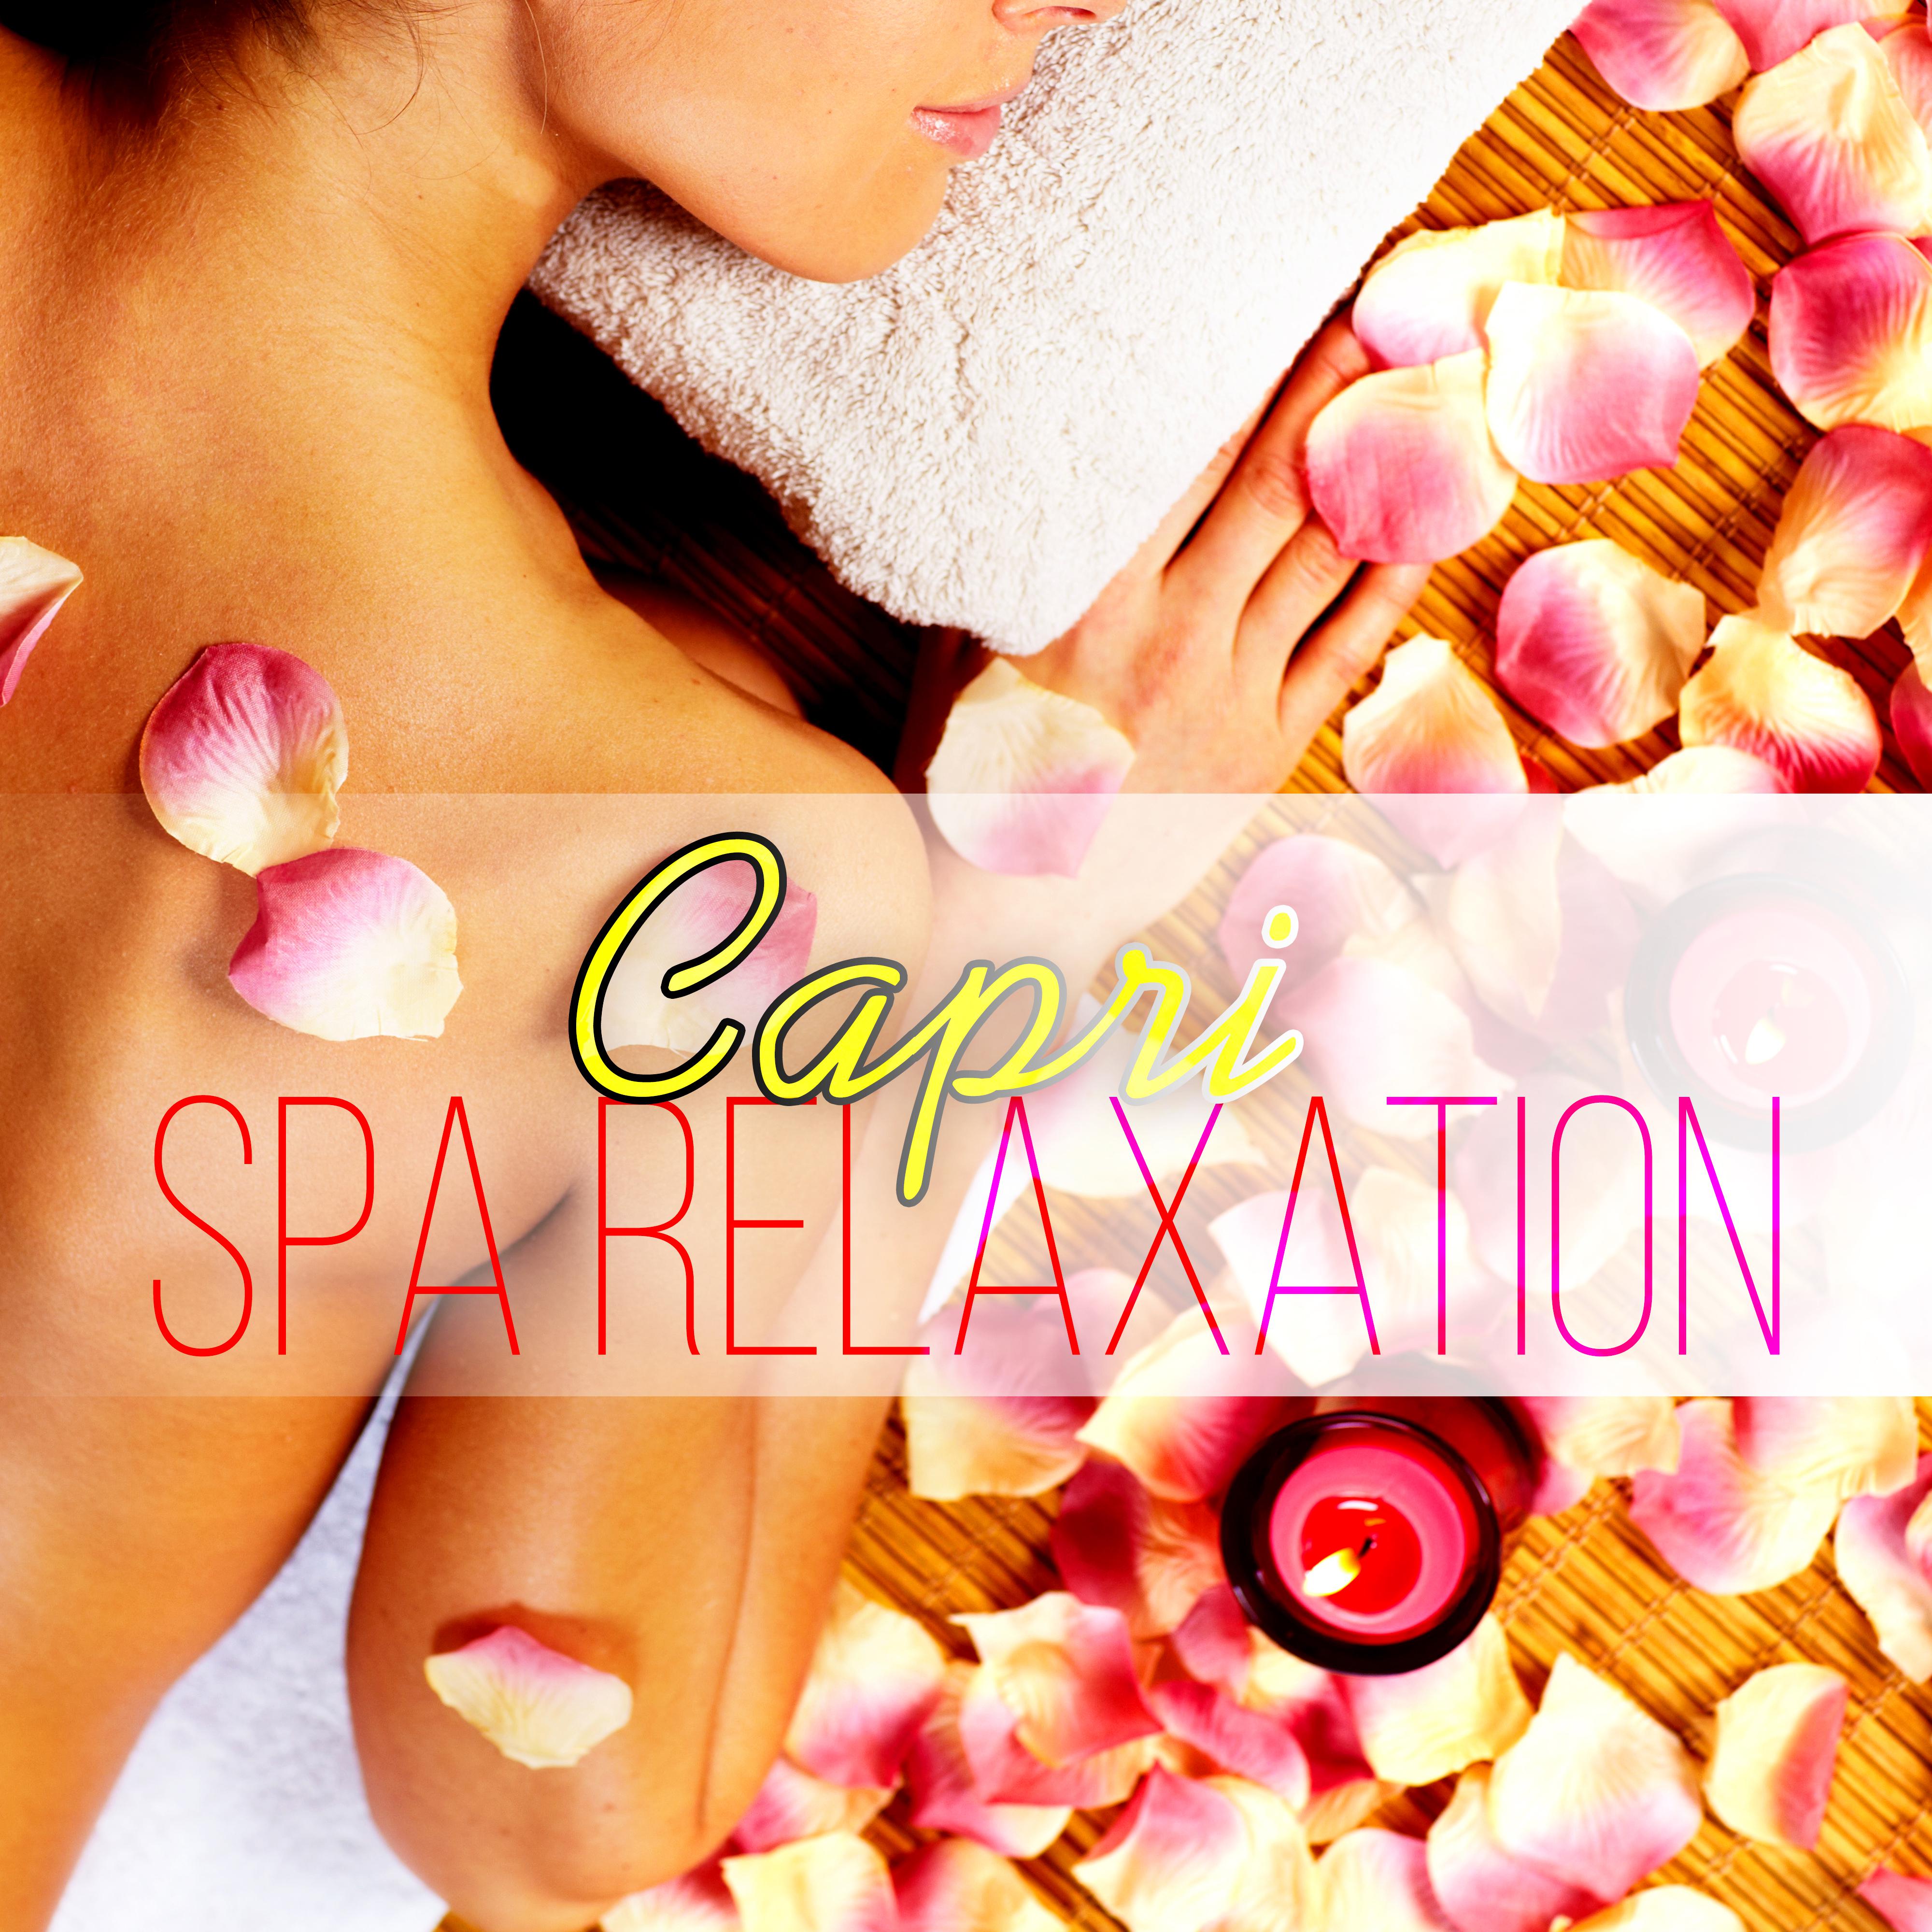 Capri Spa Music - Relaxation Music to Help You Relax, Serenity, Welness Nature Sounds, Music Therapy for the Heart, Sea Waves for Massage, Yoga & Sauna